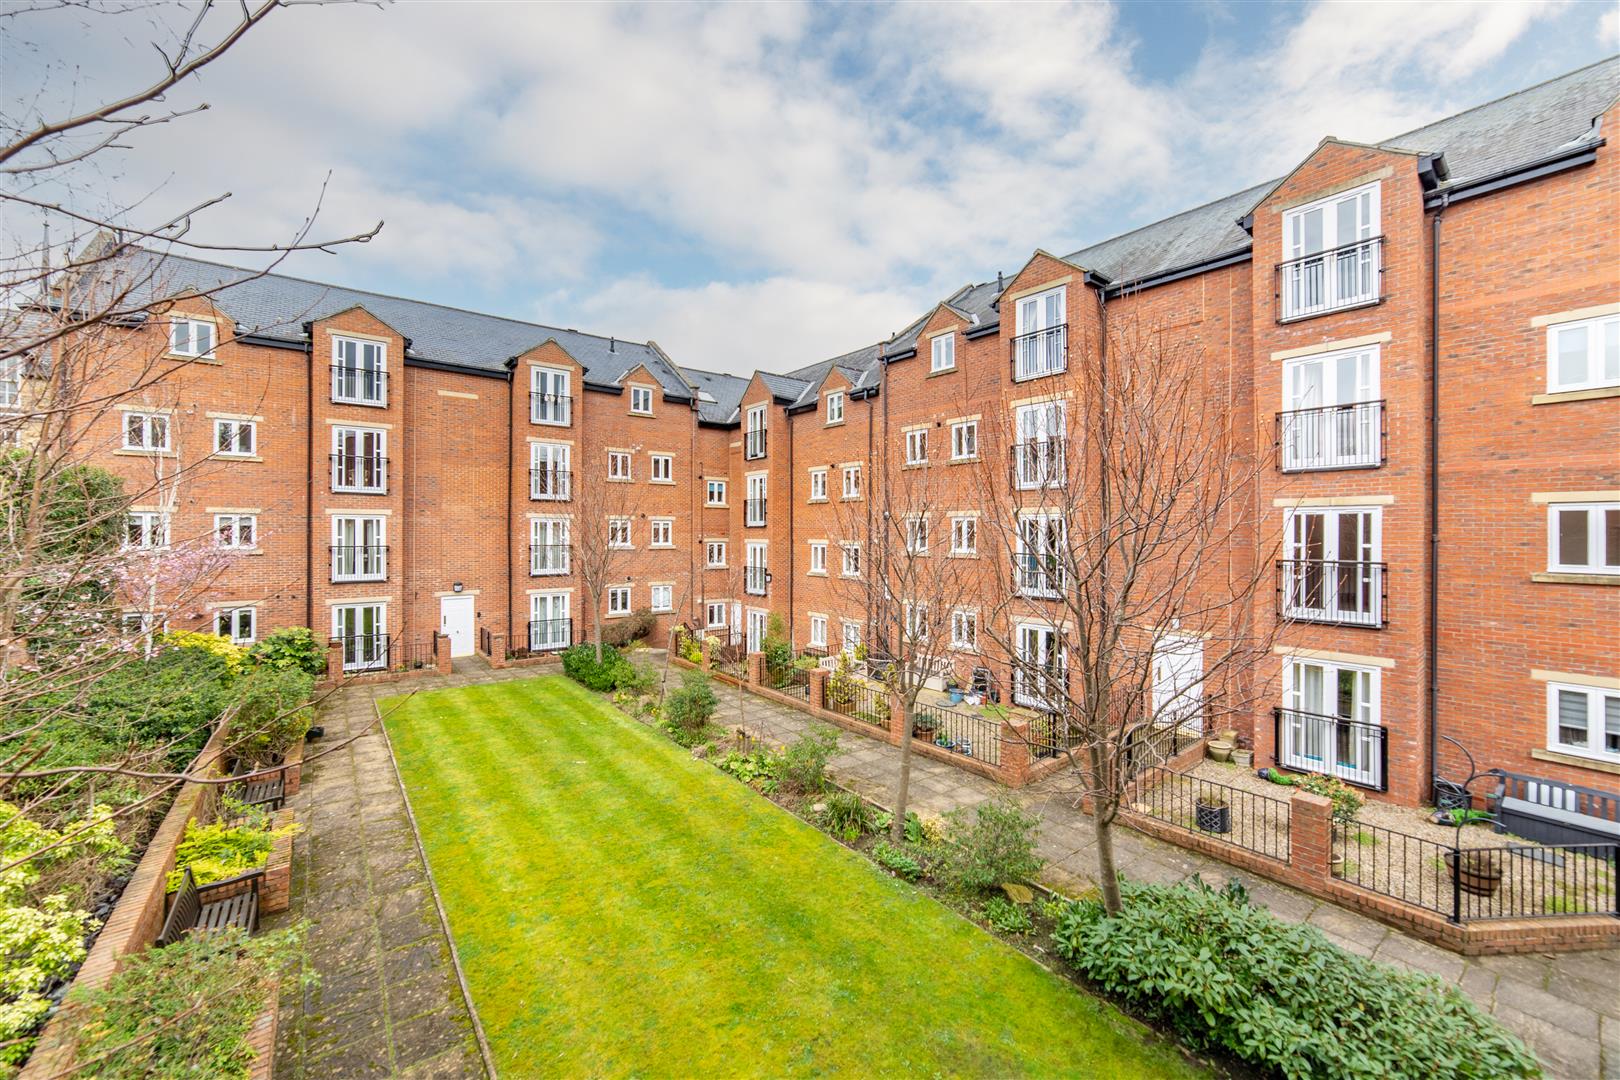 2 bed apartment for sale in Battle Hill, Hexham, NE46